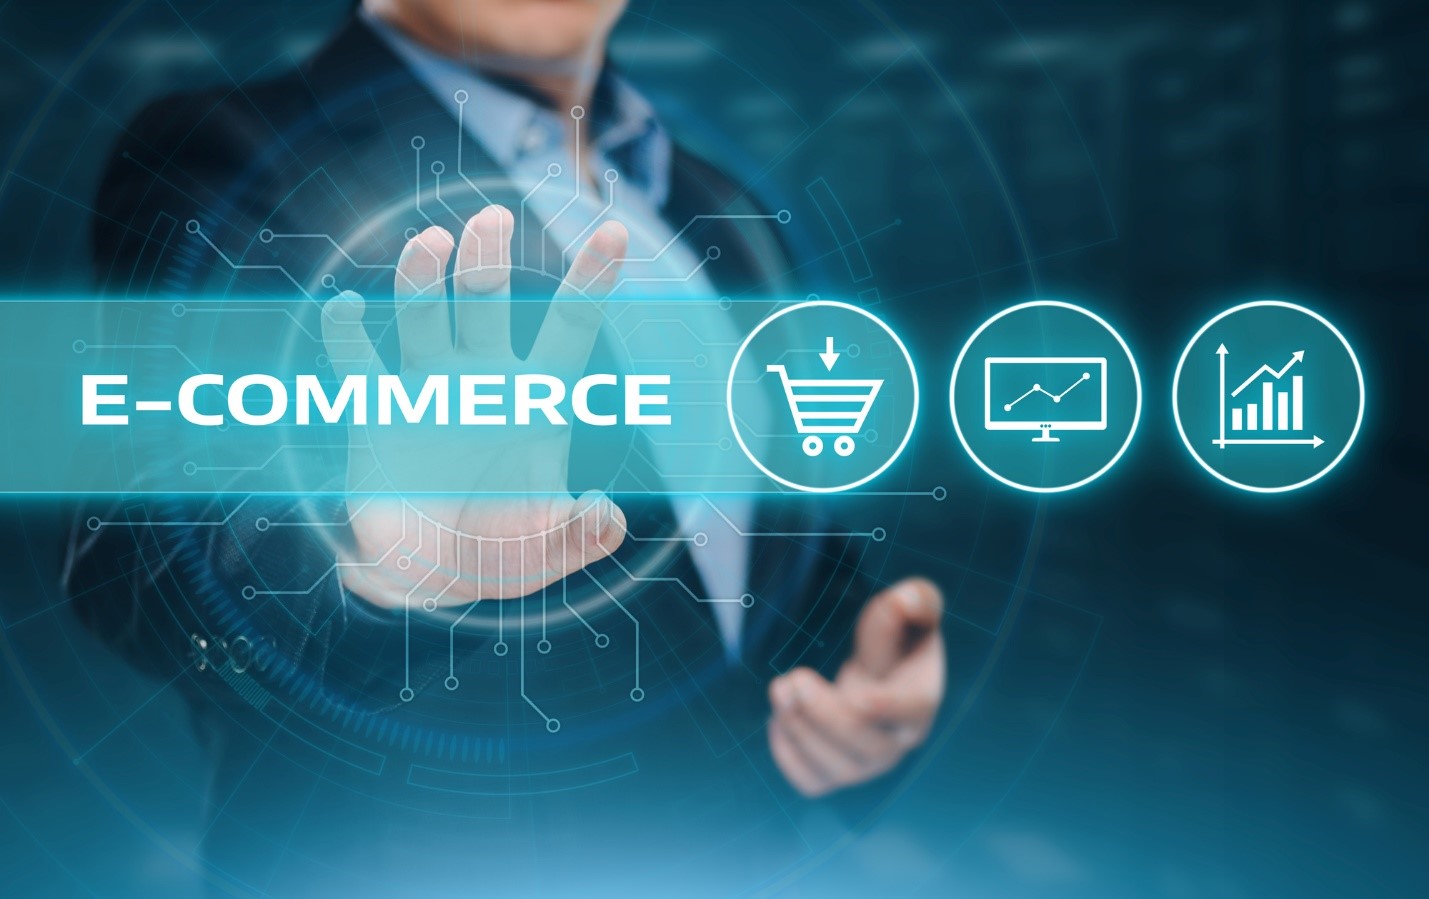 How to Improve Your Ecommerce Site Design